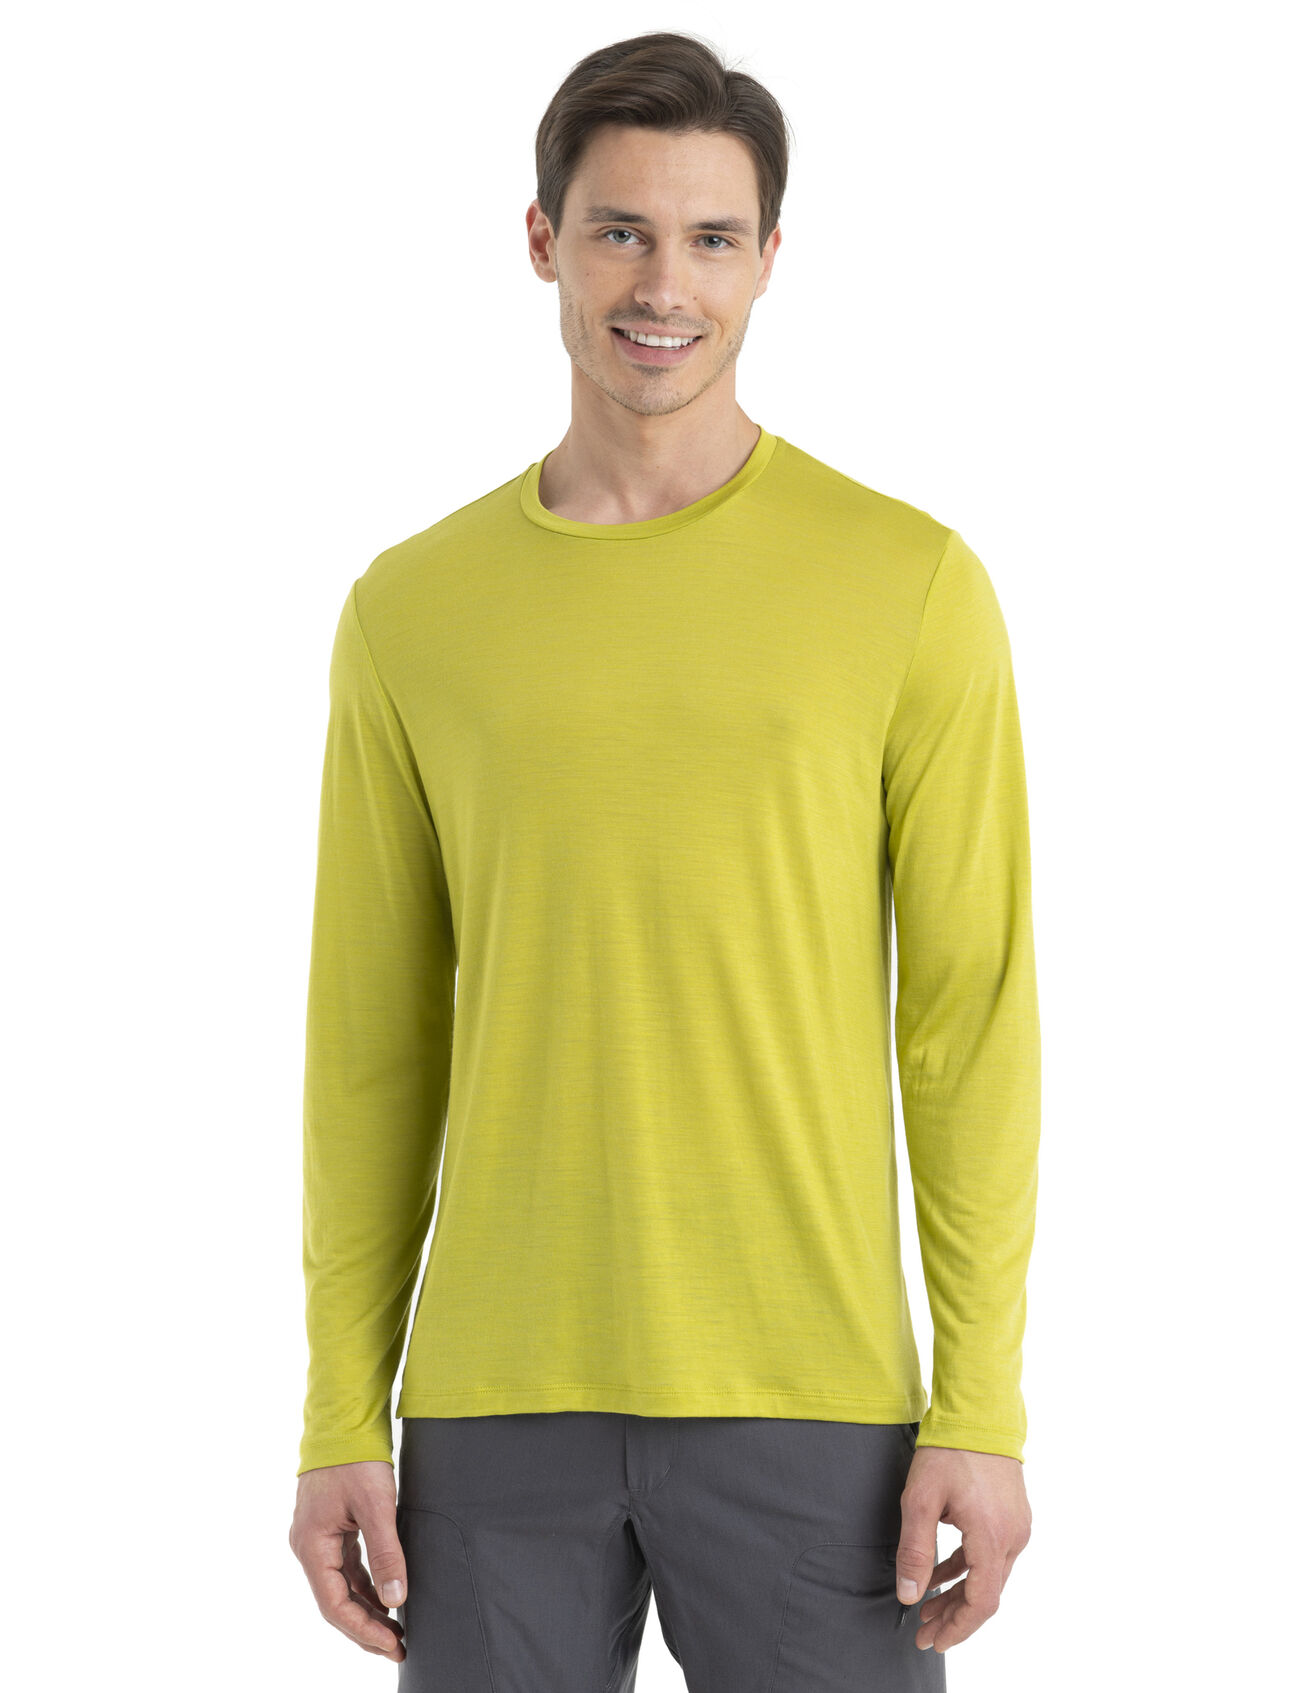 Mens Merino Sphere II Long Sleeve Tee A soft merino-blend tee made with our lightweight Cool-Lite™ jersey fabric, the Sphere II Long Sleeve Tee provides natural breathability, odor resistance and comfort.